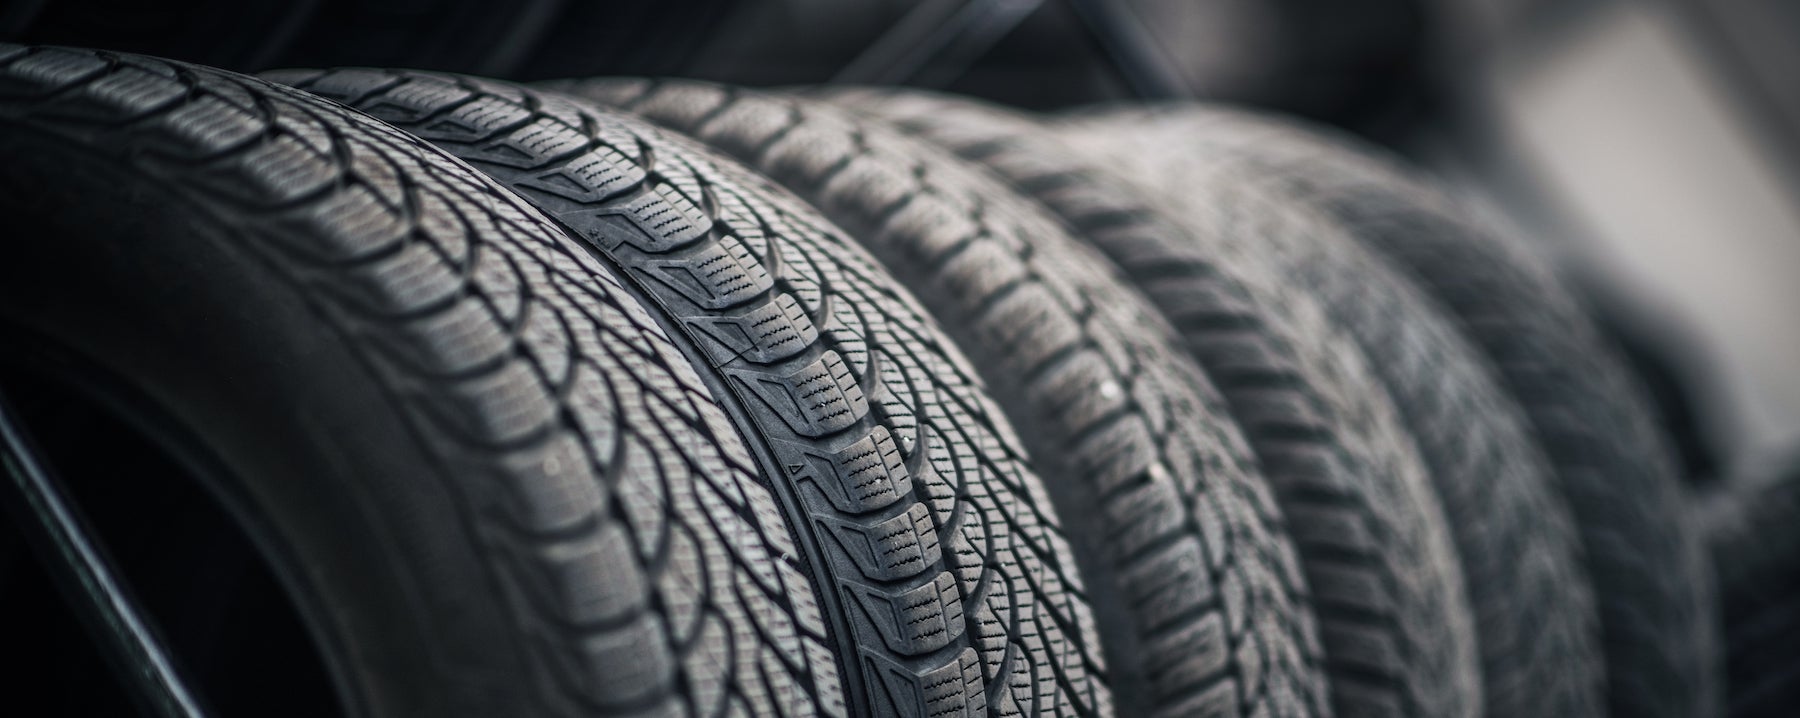 what different tire options are available at Fiore Toyota in Hollidaysburg | Tire rack